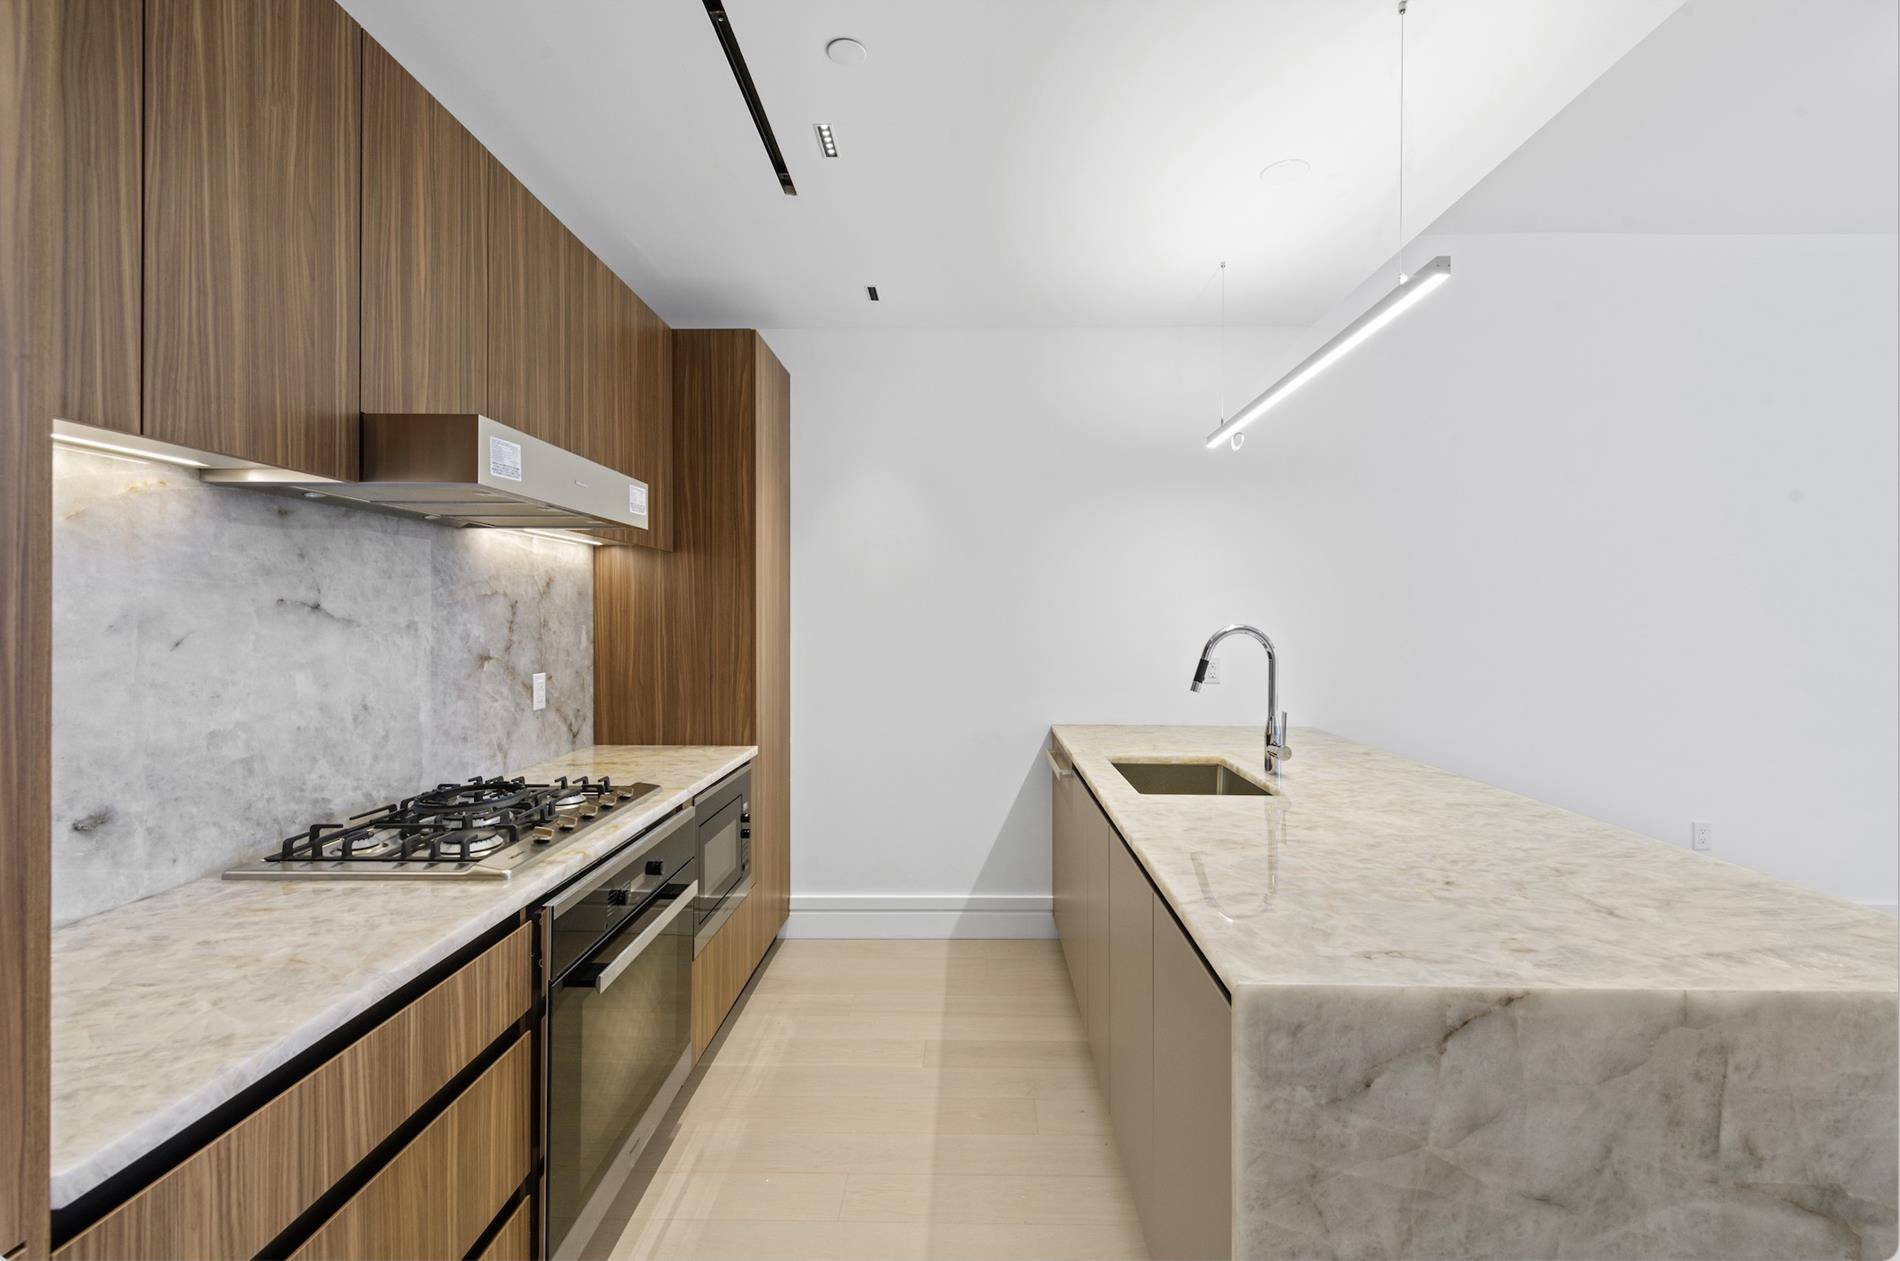 A brand new Kips Bay condo with a private balcony and an abundance of natural light, this inviting 1 bedroom, 1 bathroom home is an effortless blend of classic city ...